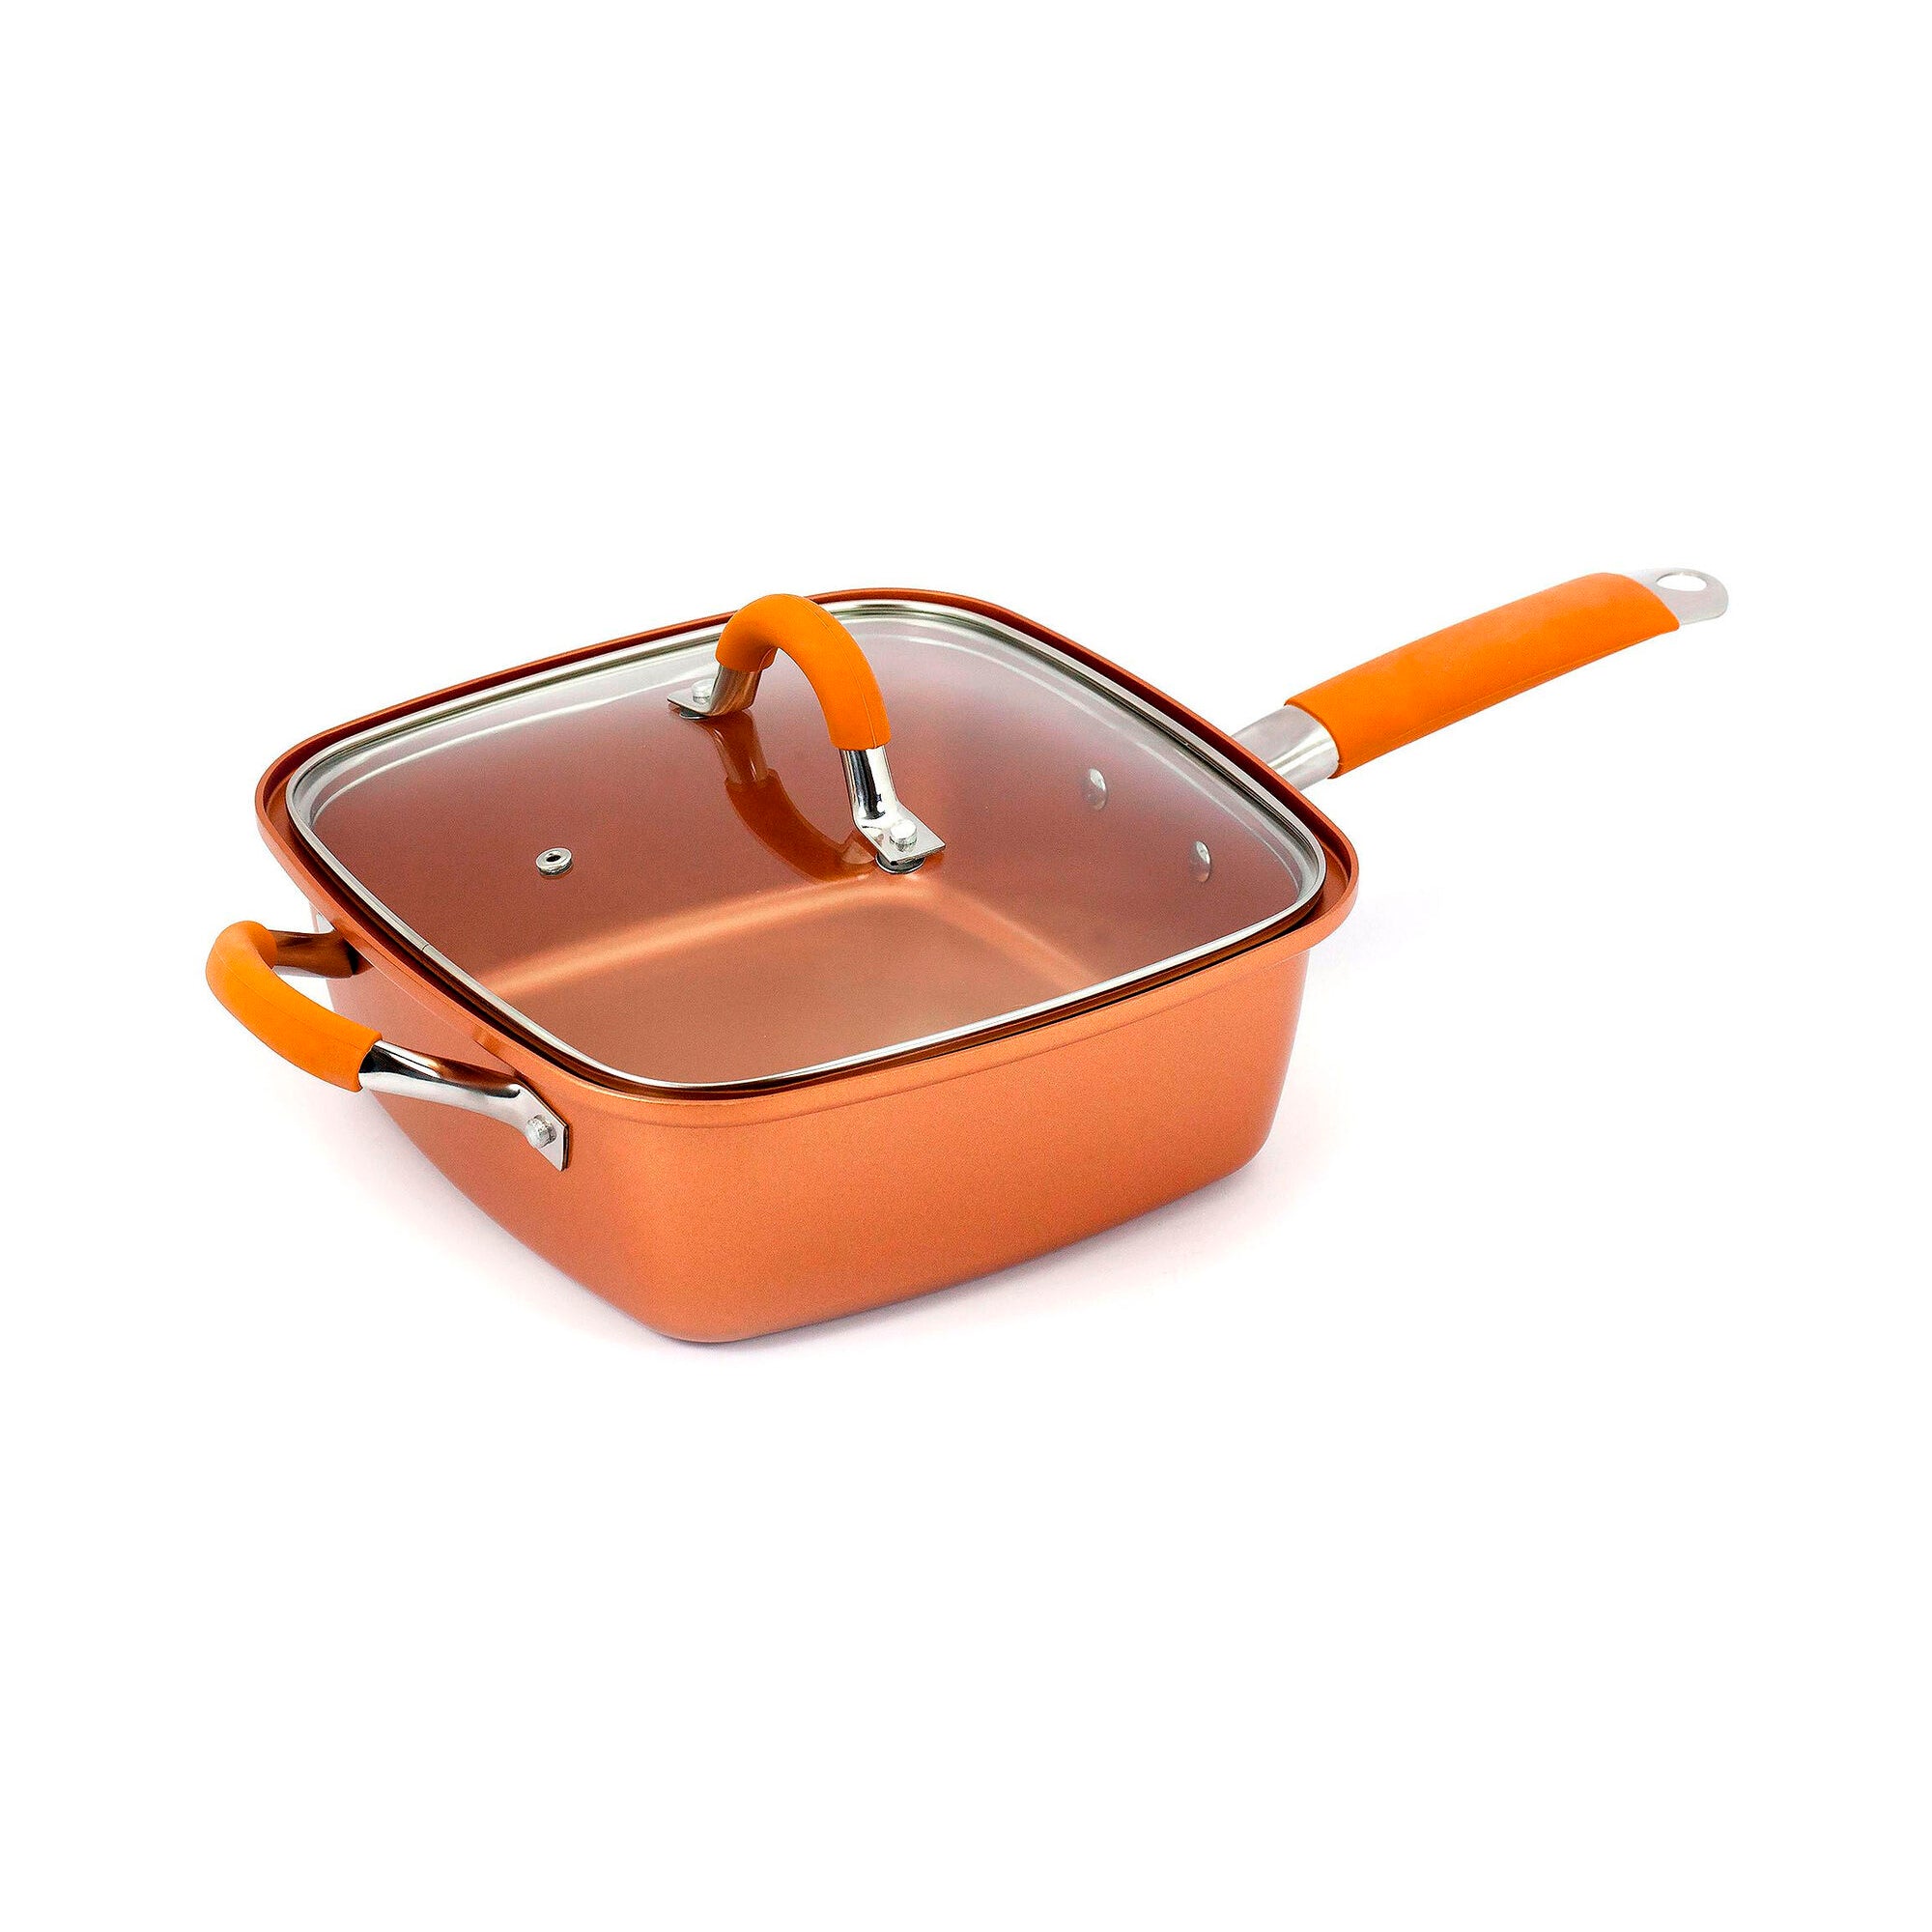 Square Copper Pan Pro All in 1 Pan For Stove Top & Oven - Mail Order B -  SharpPrices